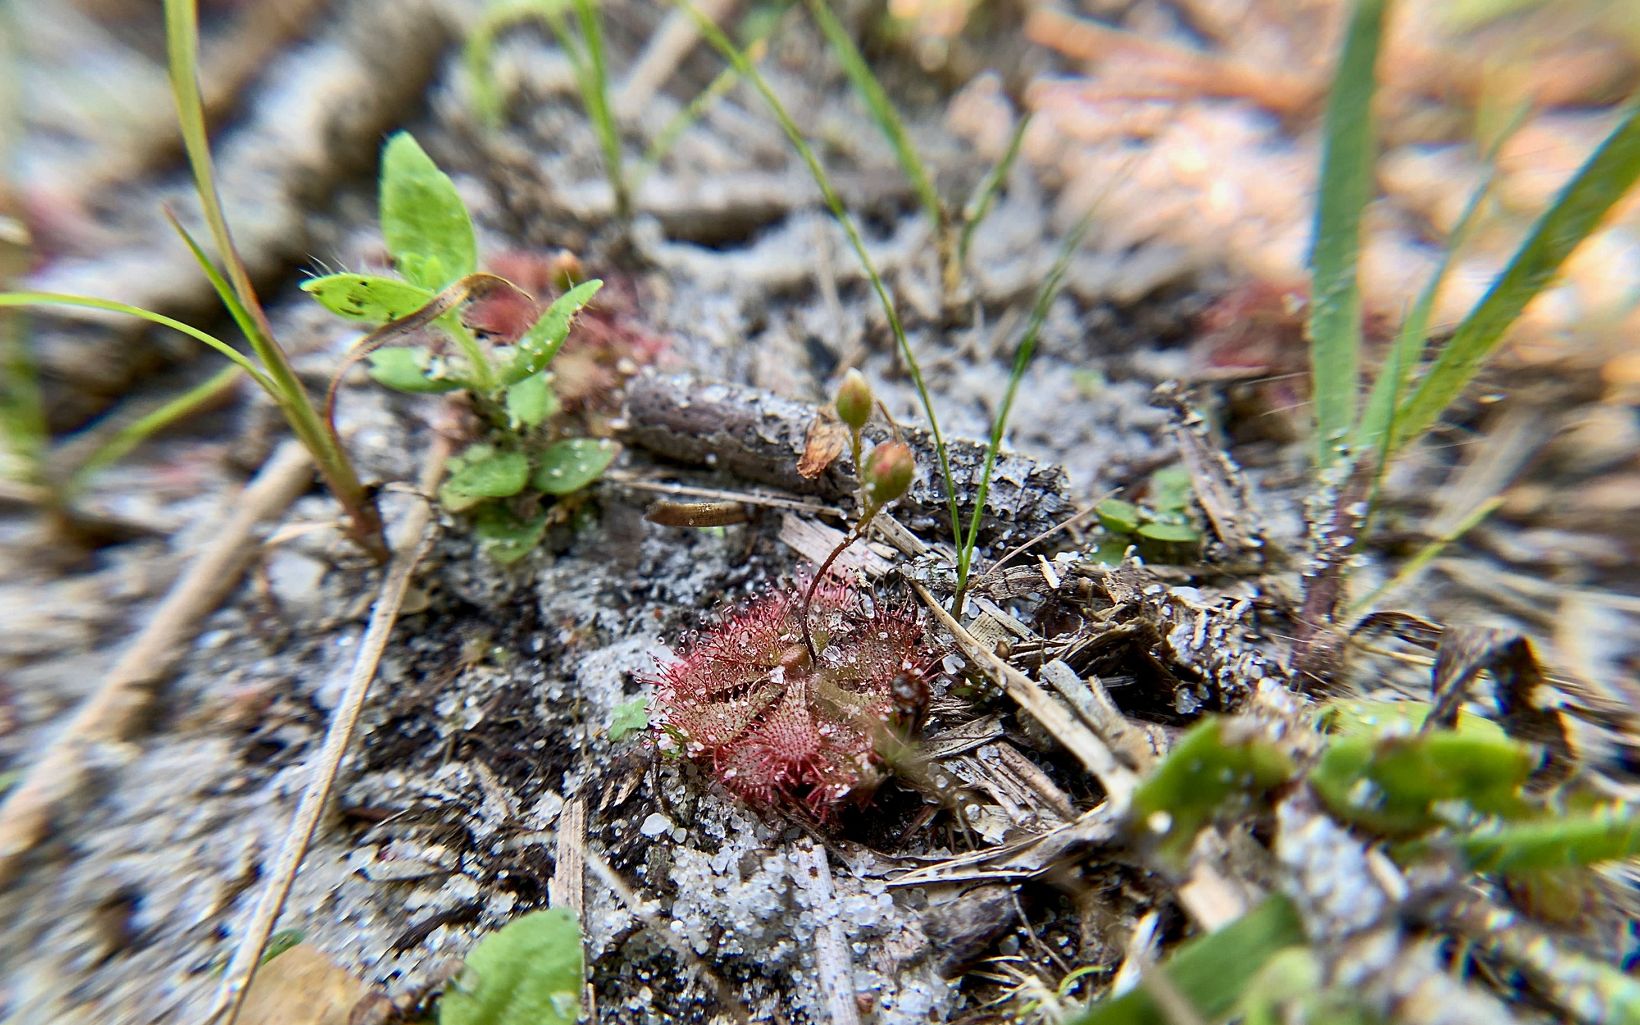 Drosera brevifolia, is an exciting find at Nassawango! The species has never before been found further north than North Carolina.